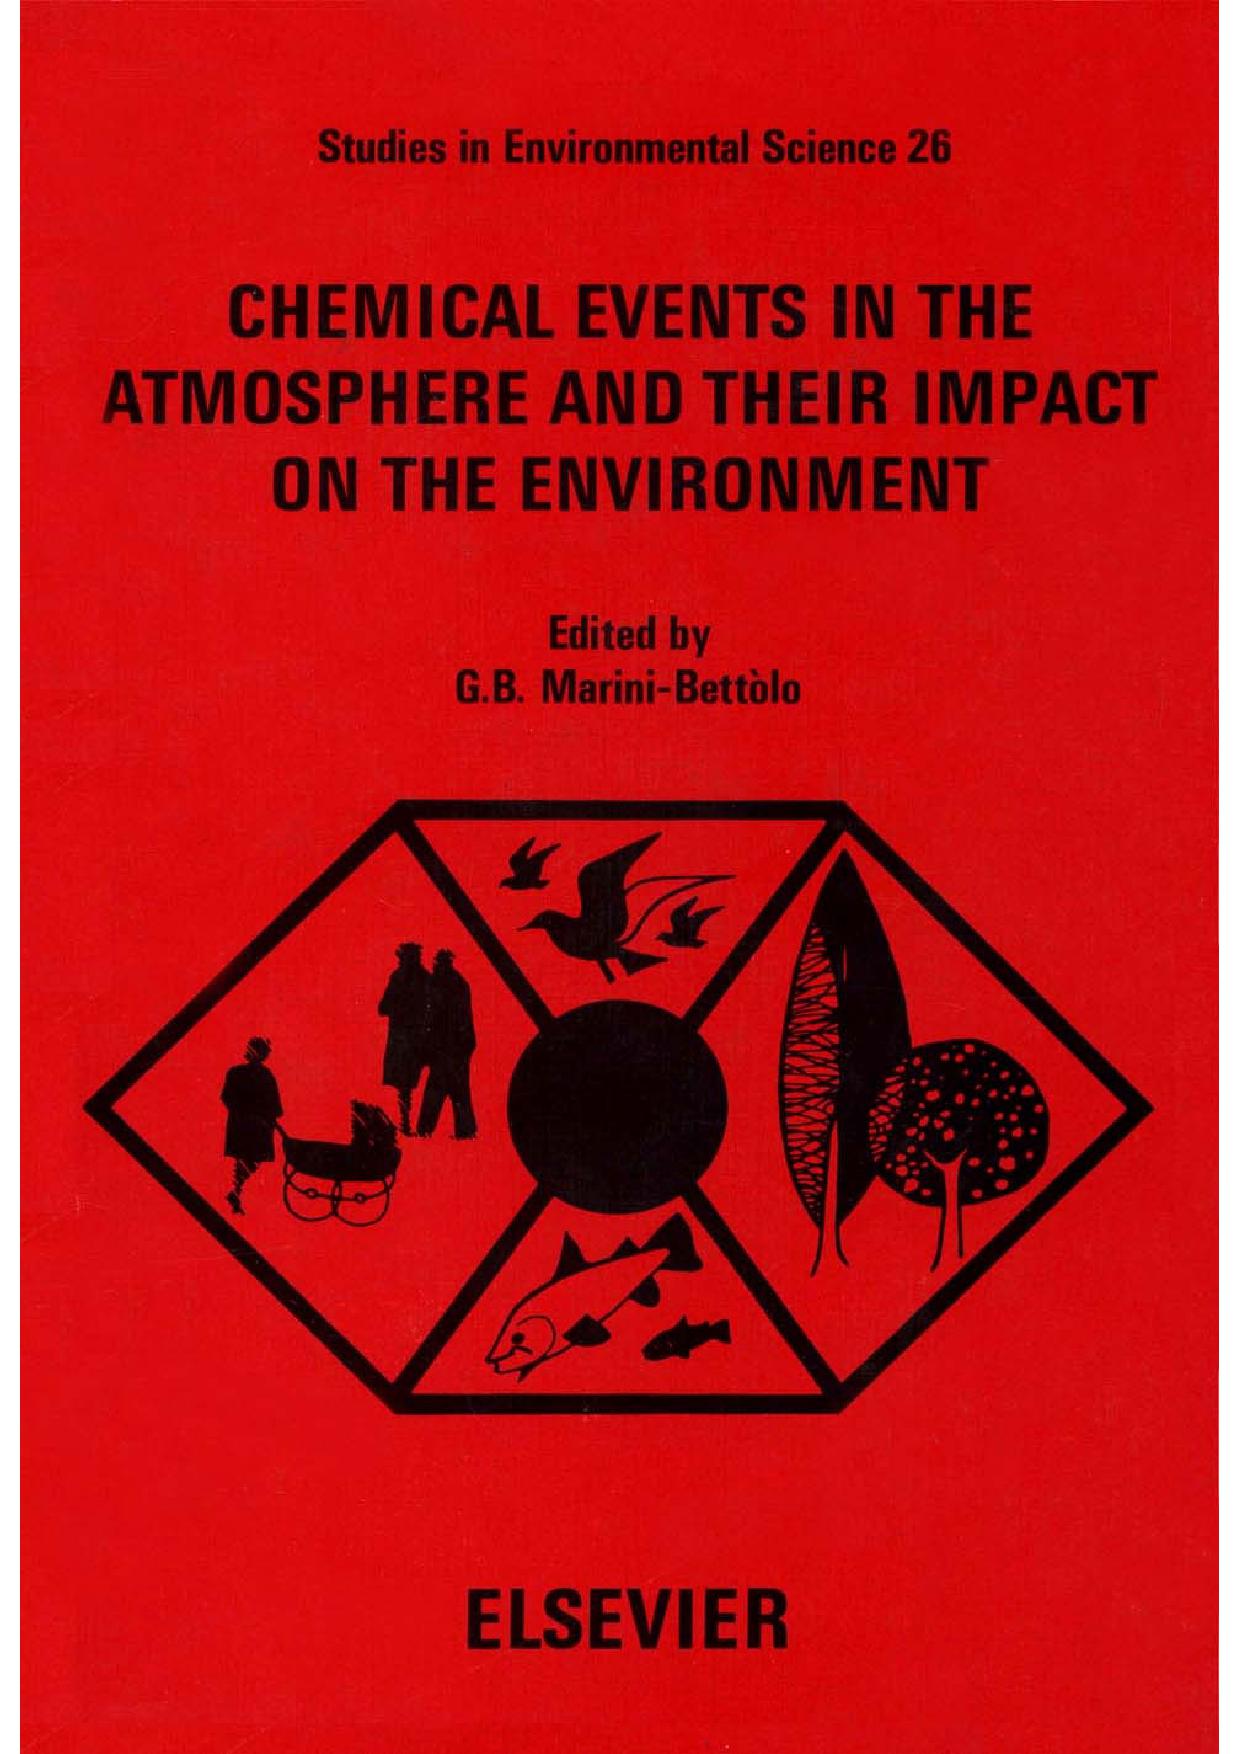 CHEMICAL EVENTS IN THE ATMOSPHERE  AND THEIR IMPACT ON THE ENVIRONMENT